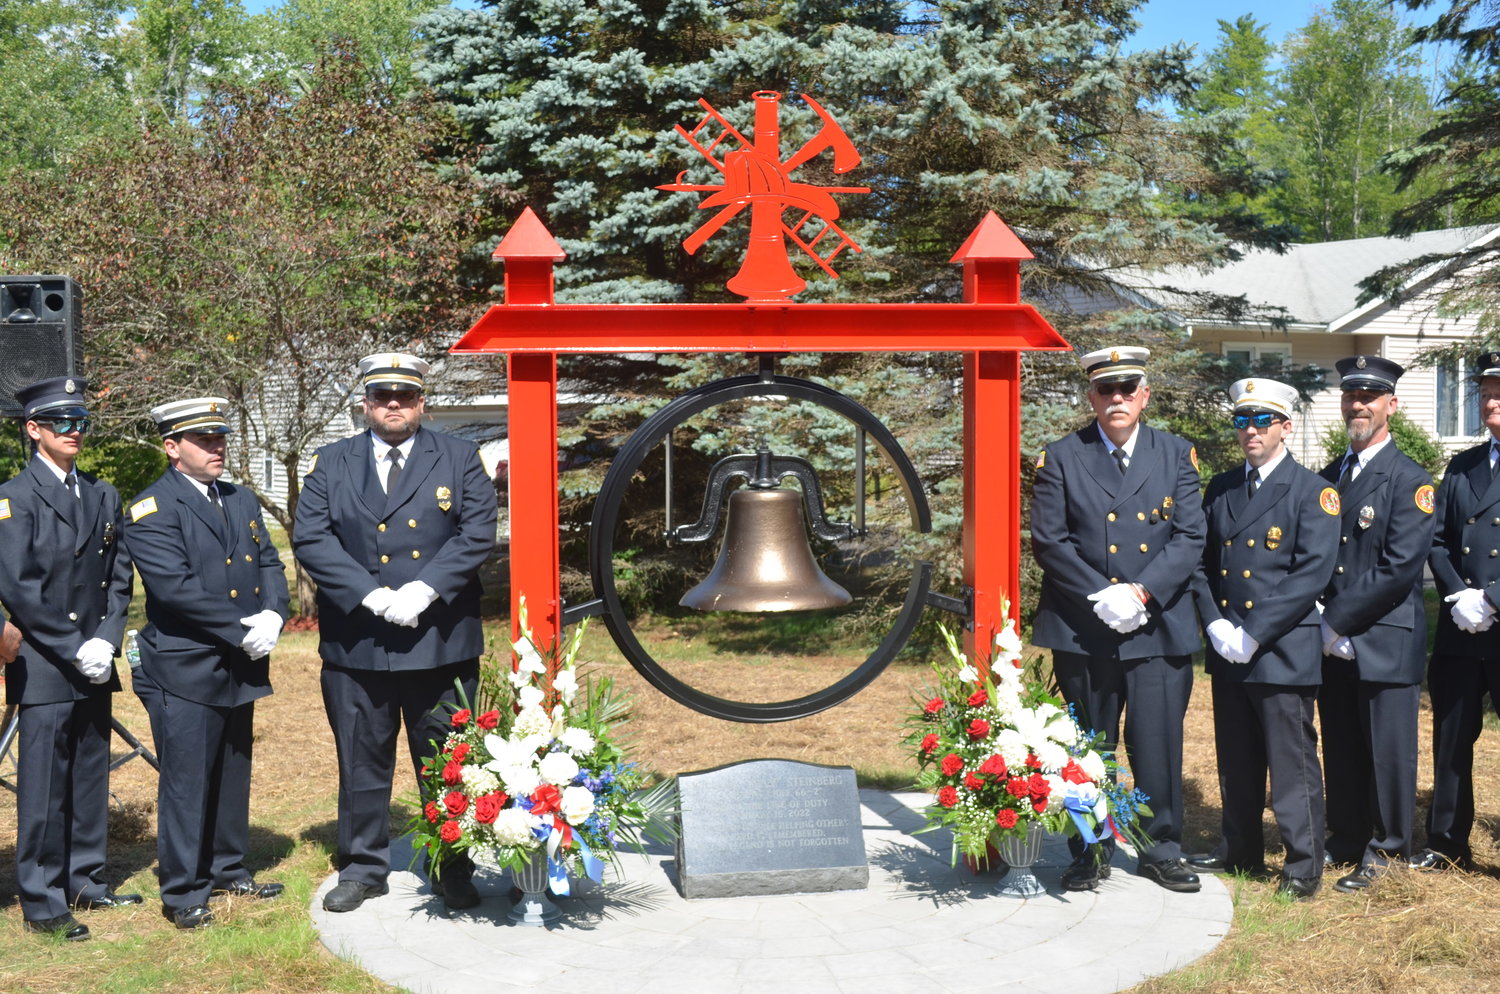 The memorial in honor of William "Billy" Steinberg stands in place outside the Forestburgh Fire Company No. 1 building, flanked by firefighters.